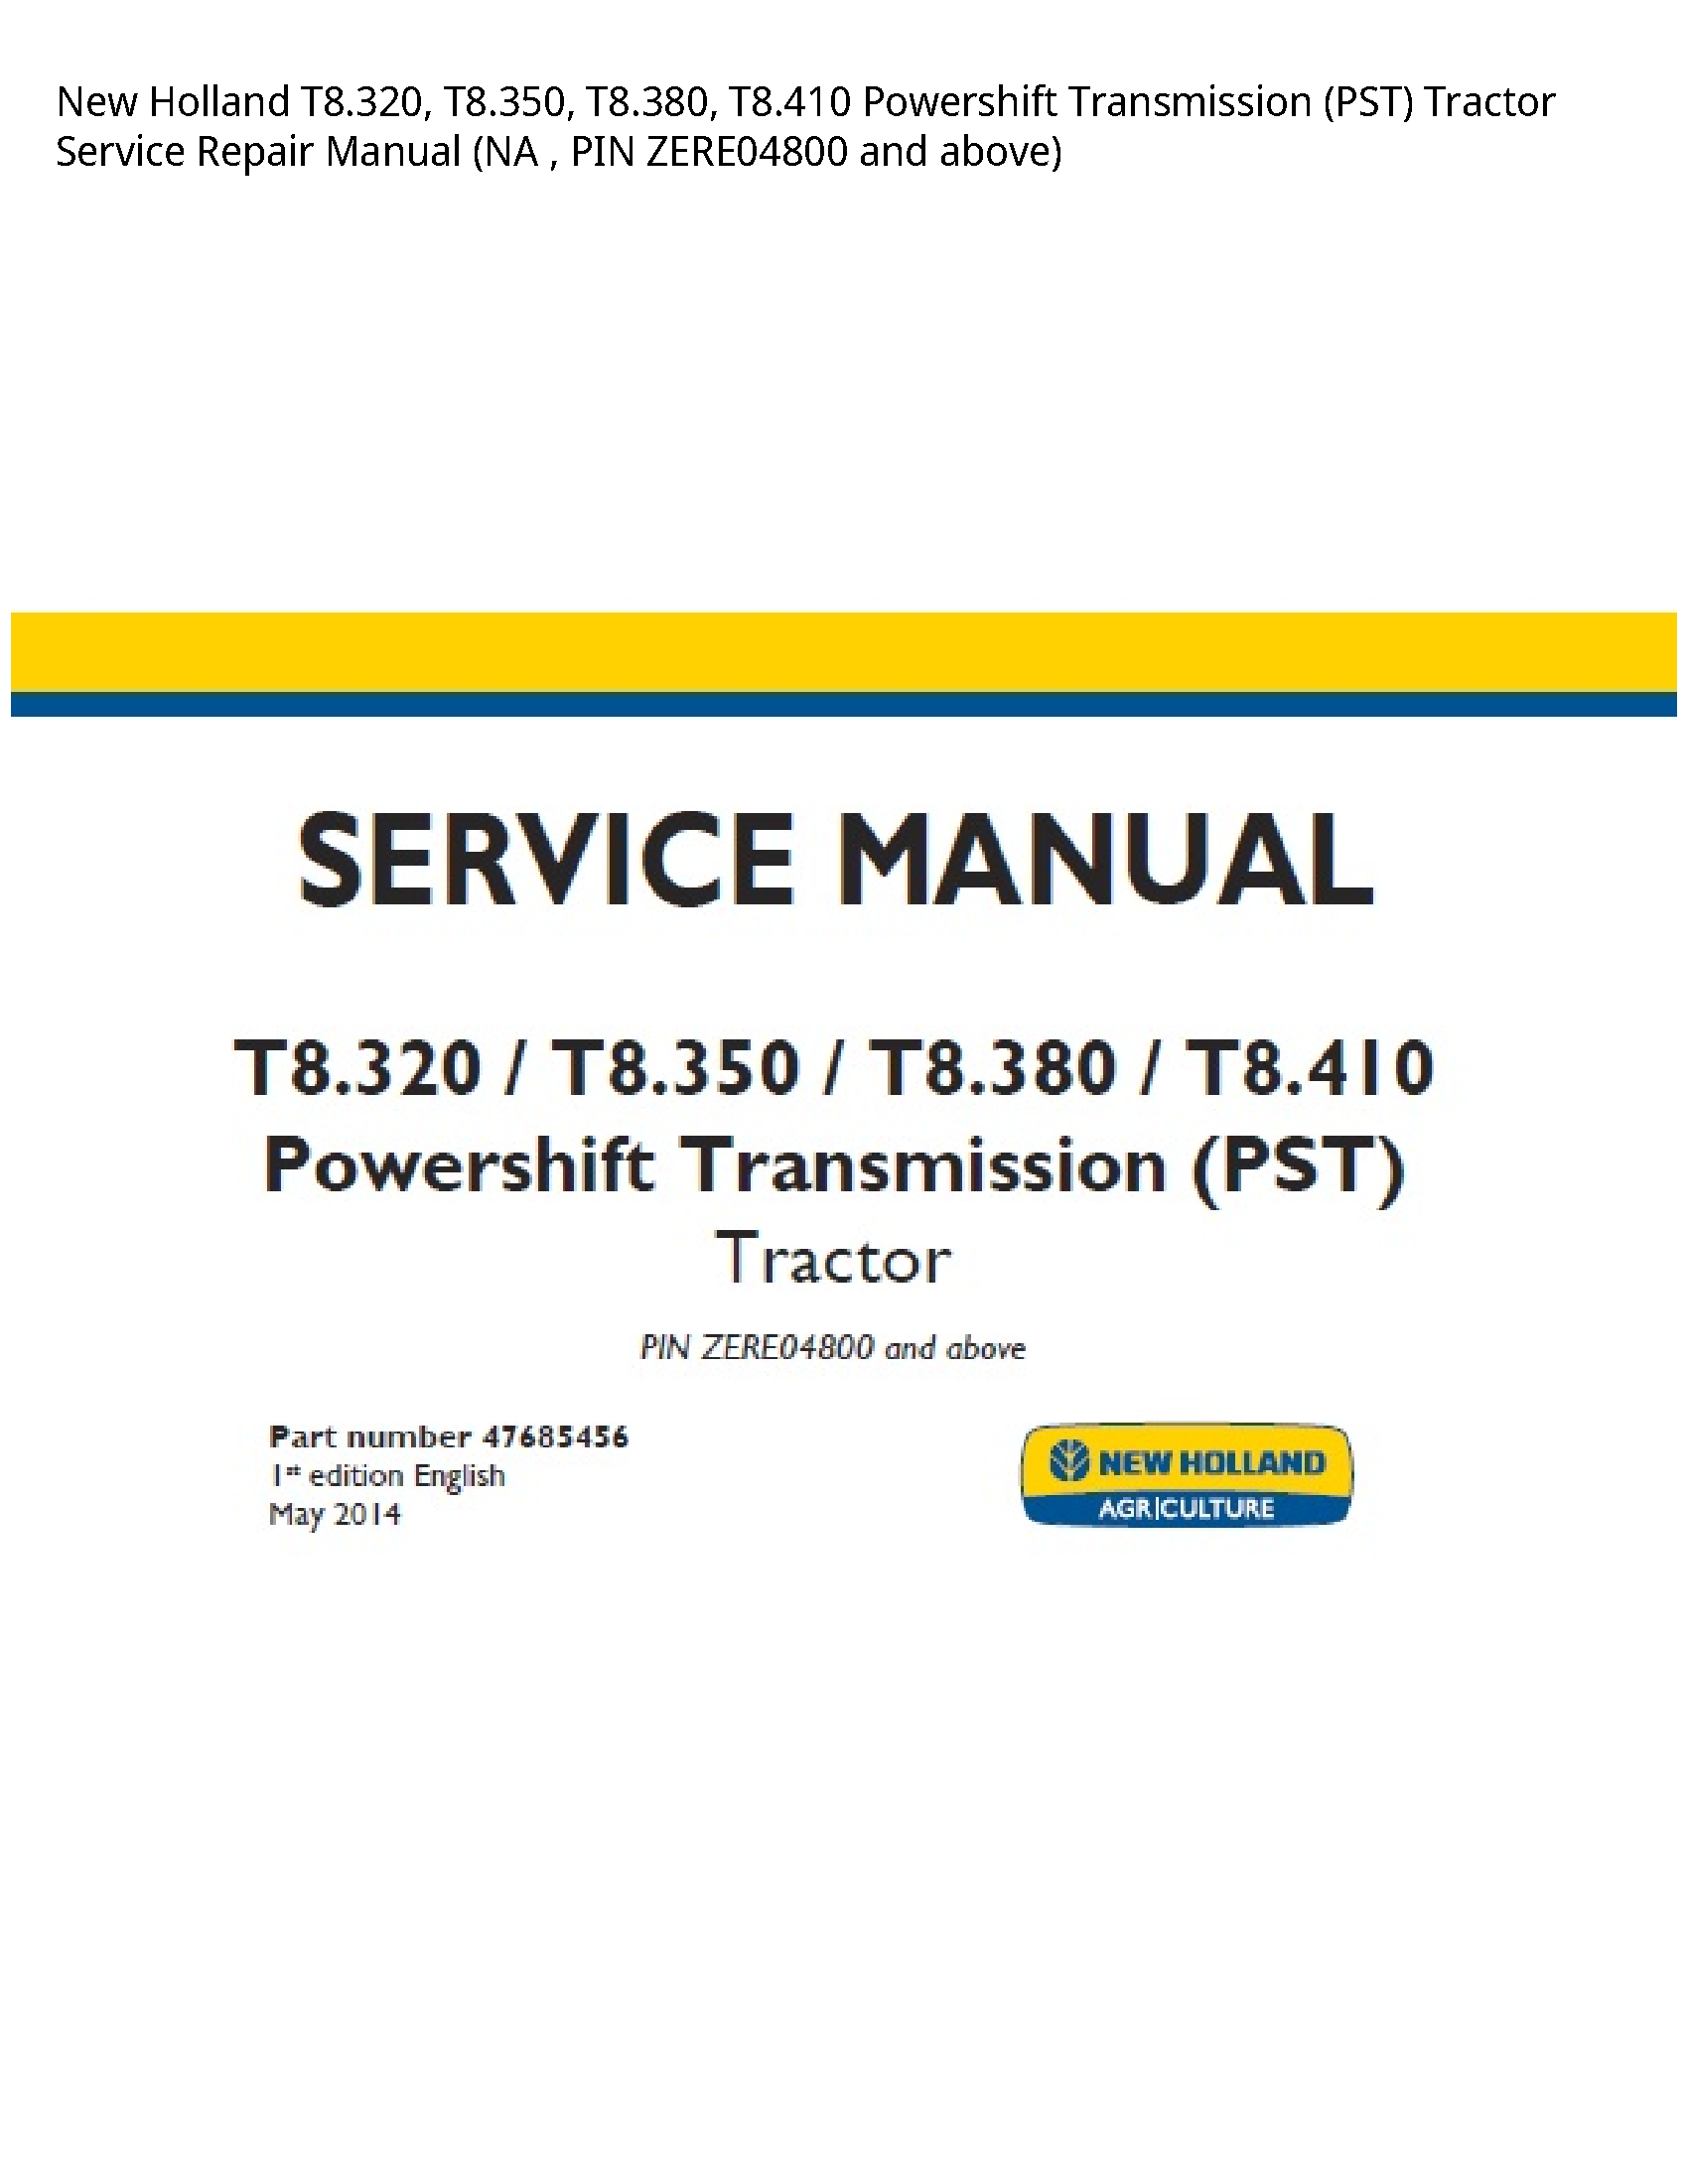 New Holland T8.320 Powershift Transmission (PST) Tractor manual